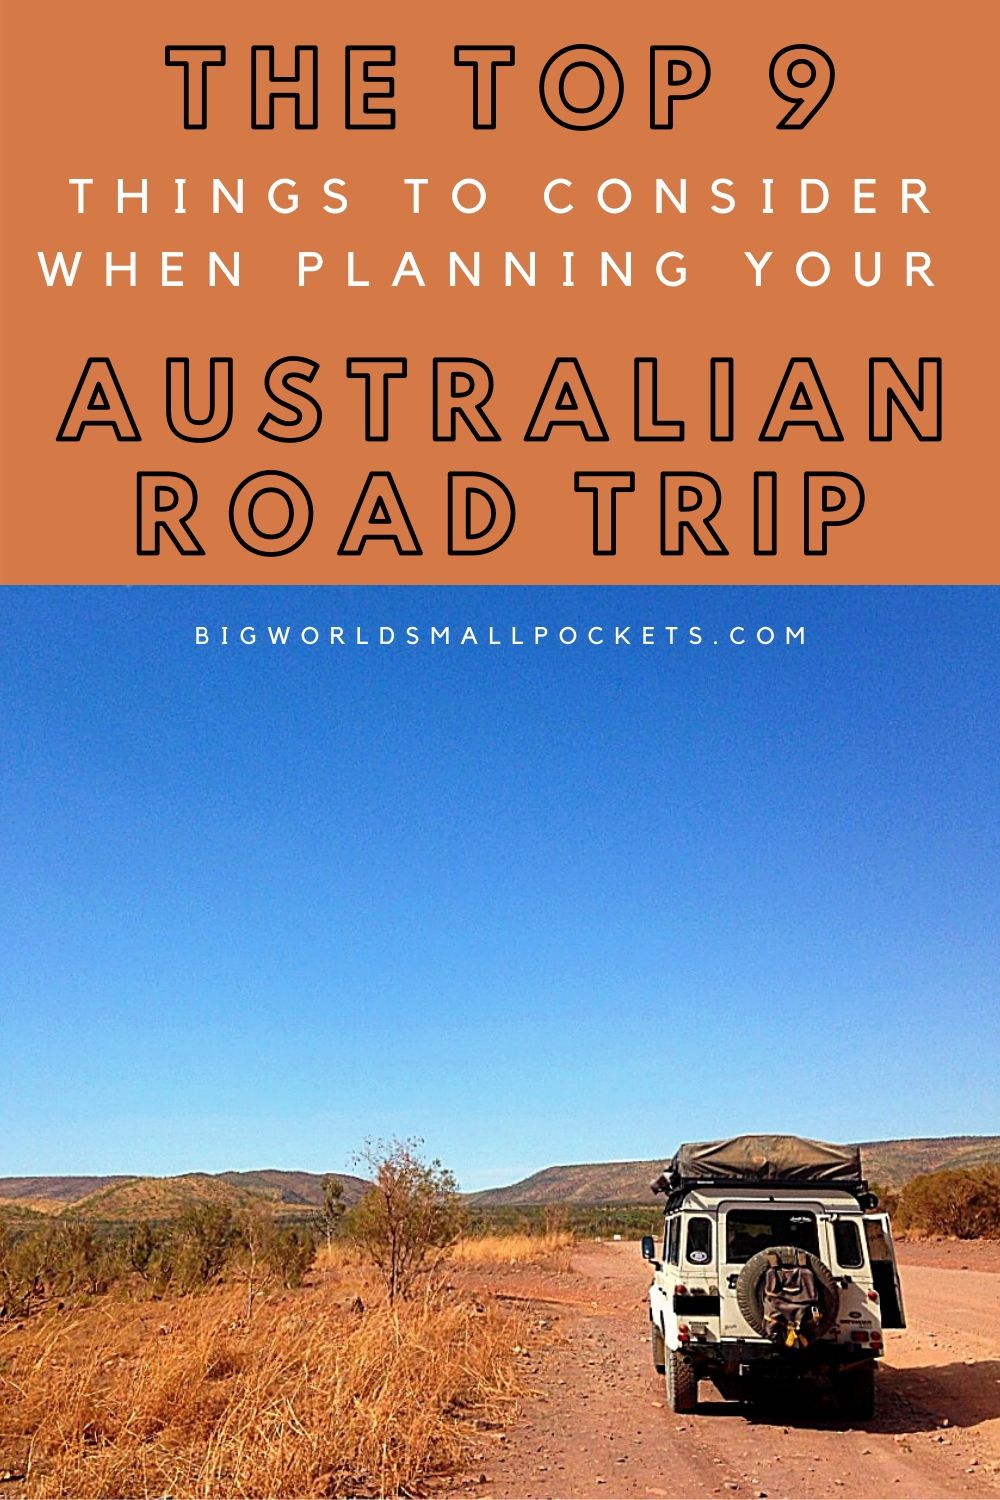 9 Crucial Things to Consider When Planning Your Australia Road Trip